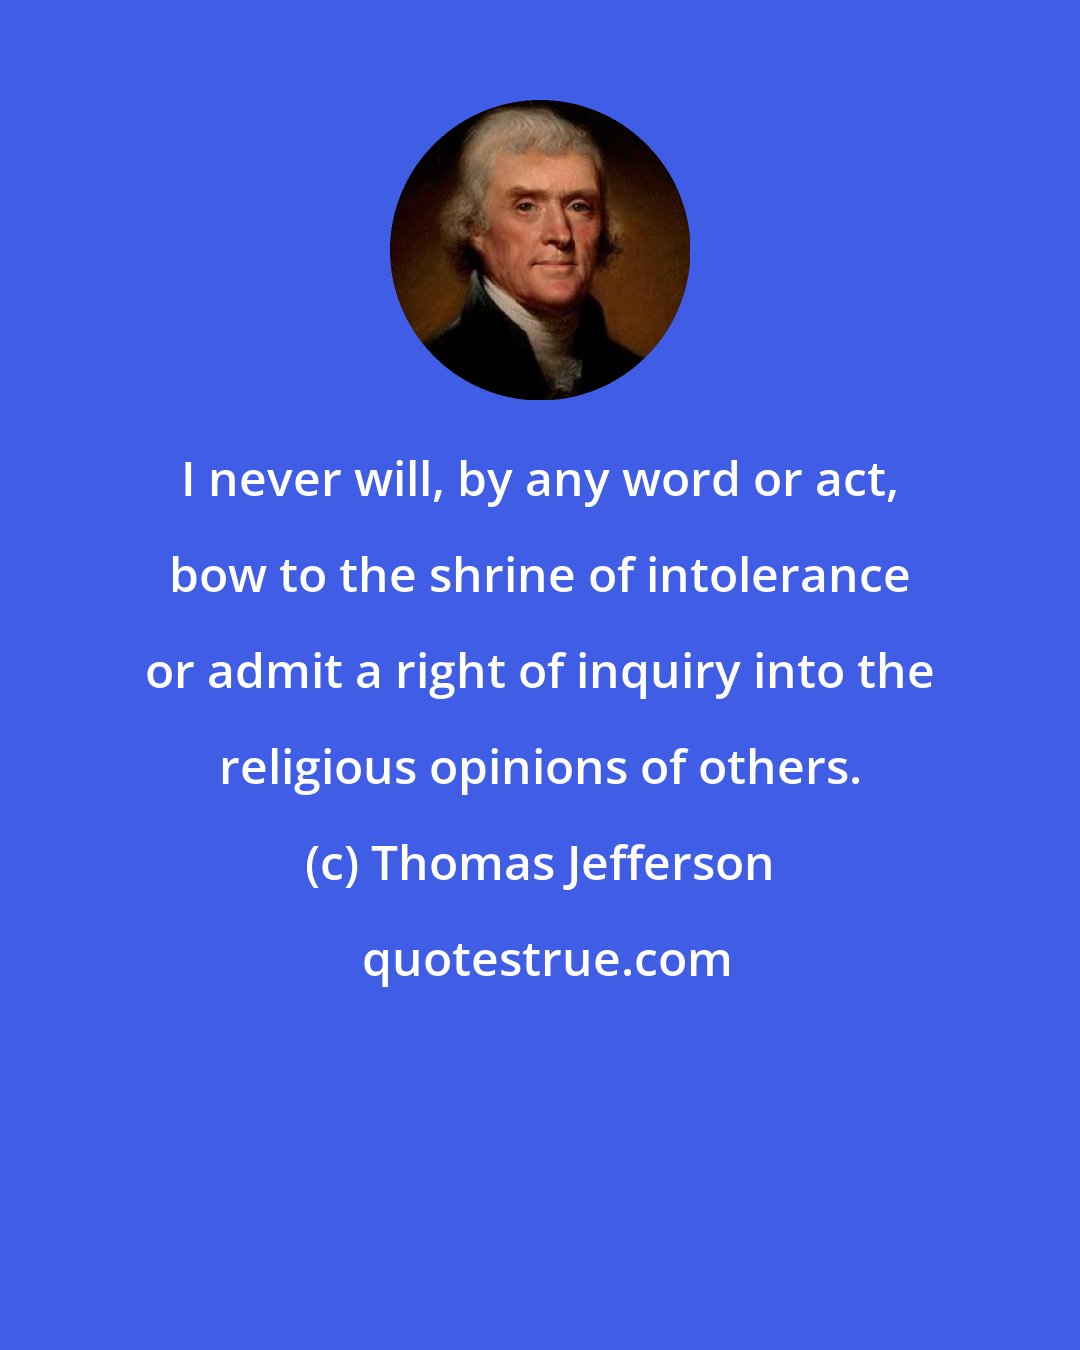 Thomas Jefferson: I never will, by any word or act, bow to the shrine of intolerance or admit a right of inquiry into the religious opinions of others.